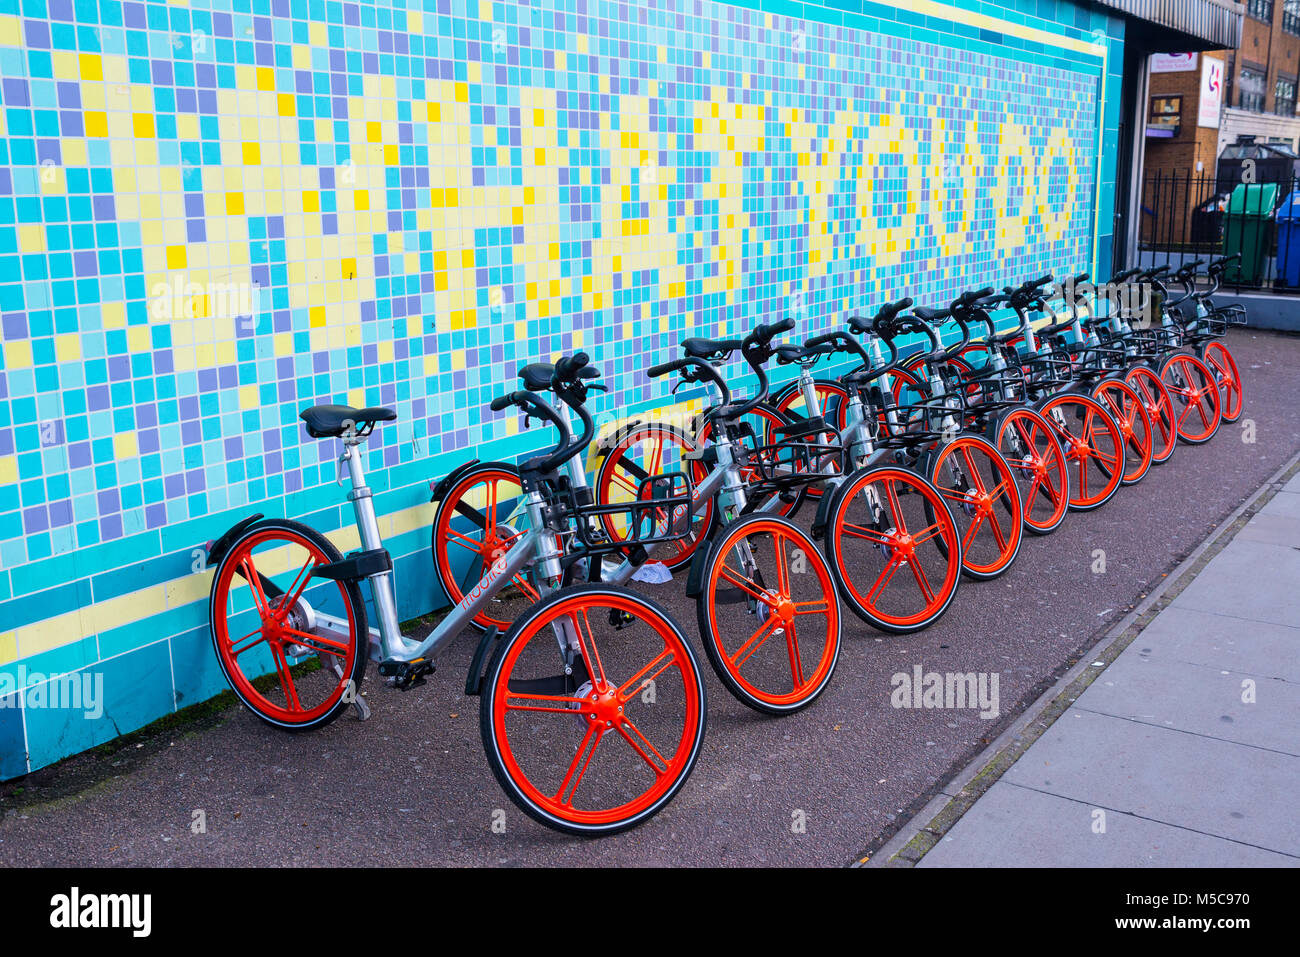 Mobike bicycles parked at a docking station in Torrens street, Angel, London. Mobike is a low cost bike-sharing scheme hugely popular in China. Stock Photo